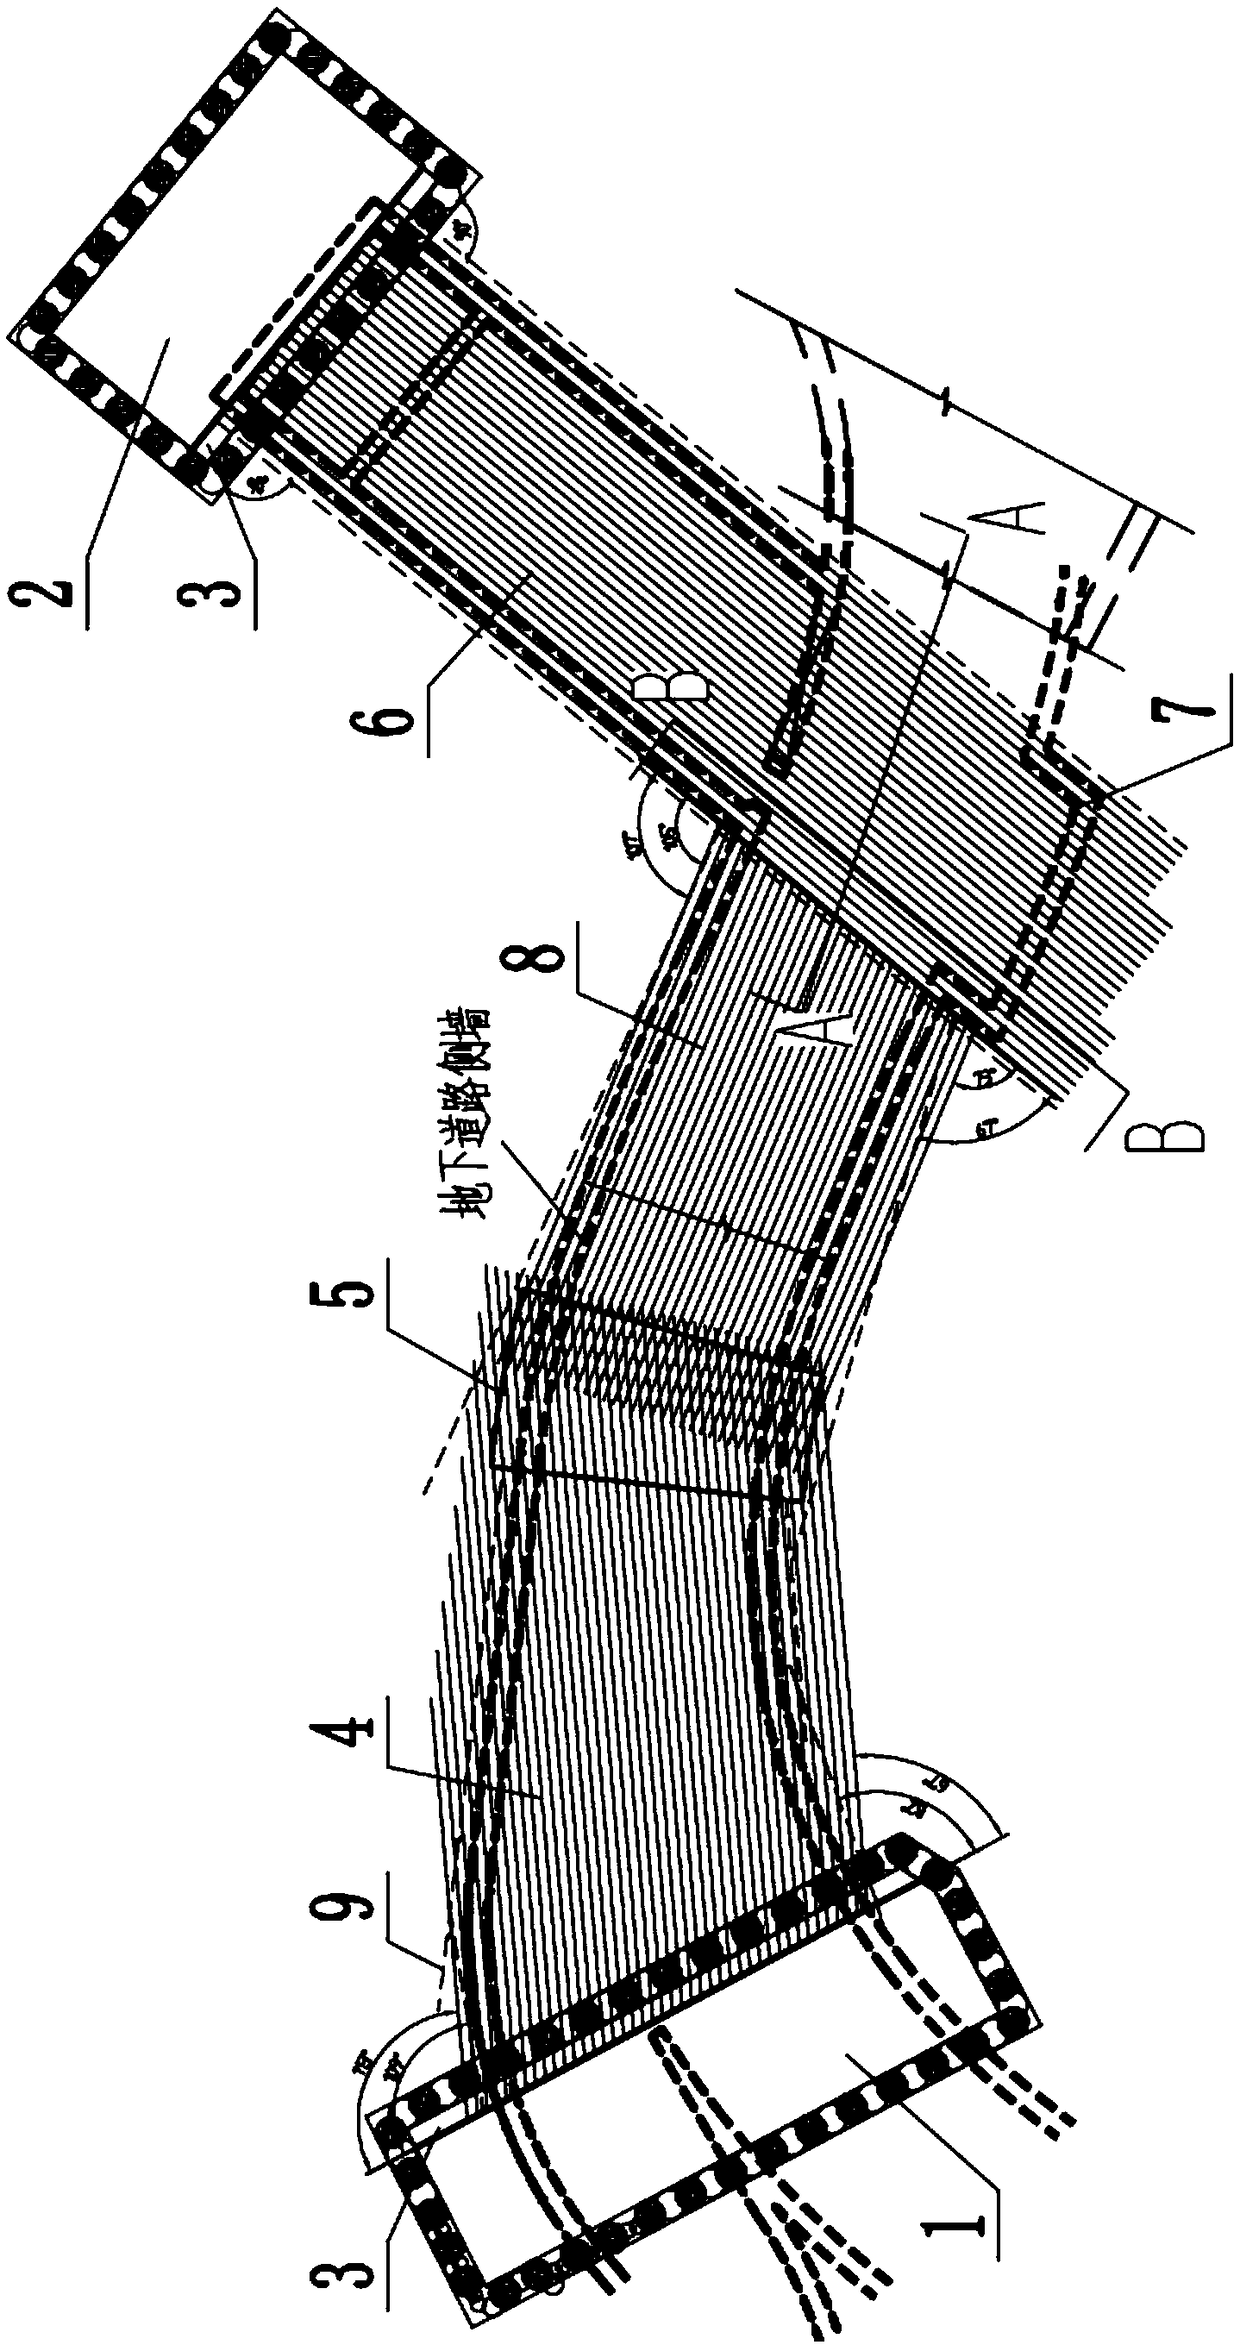 Shallow-buried underground excavation construction method for arc-shaped variable-section tunnels in rock-filled strata